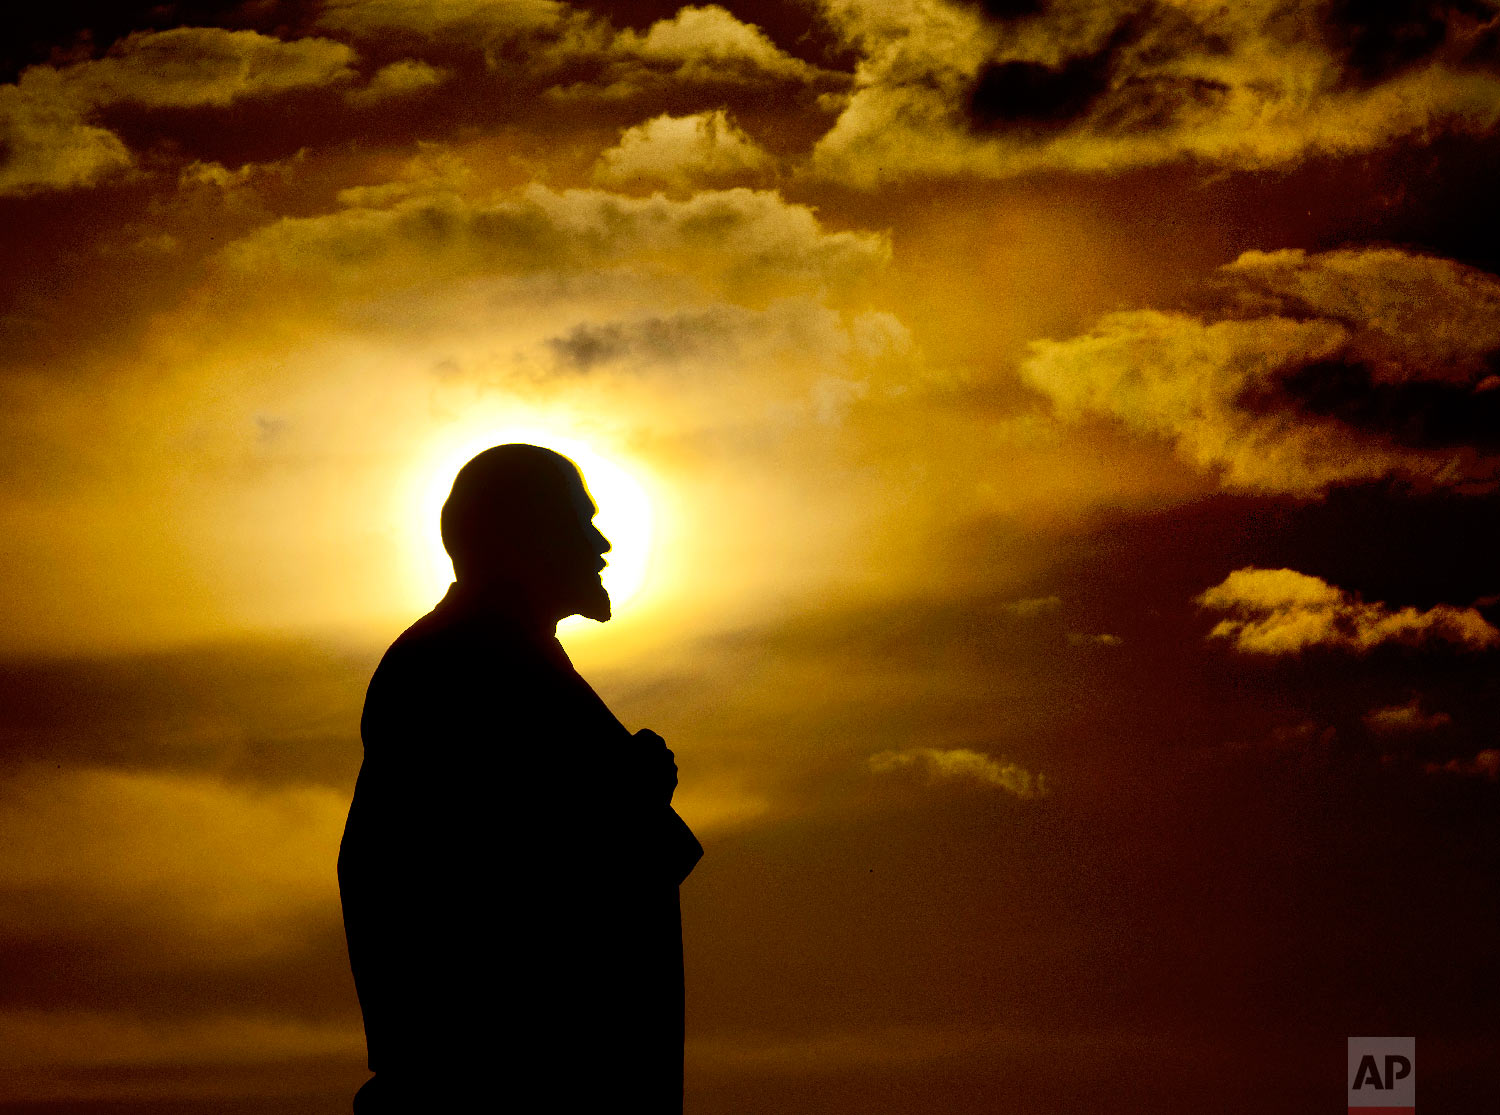  The sun sets behind a Lenin statue during the 2018 soccer World Cup in Podolsk, Russia on June 28, 2018. (AP Photo/Michael Probst) 